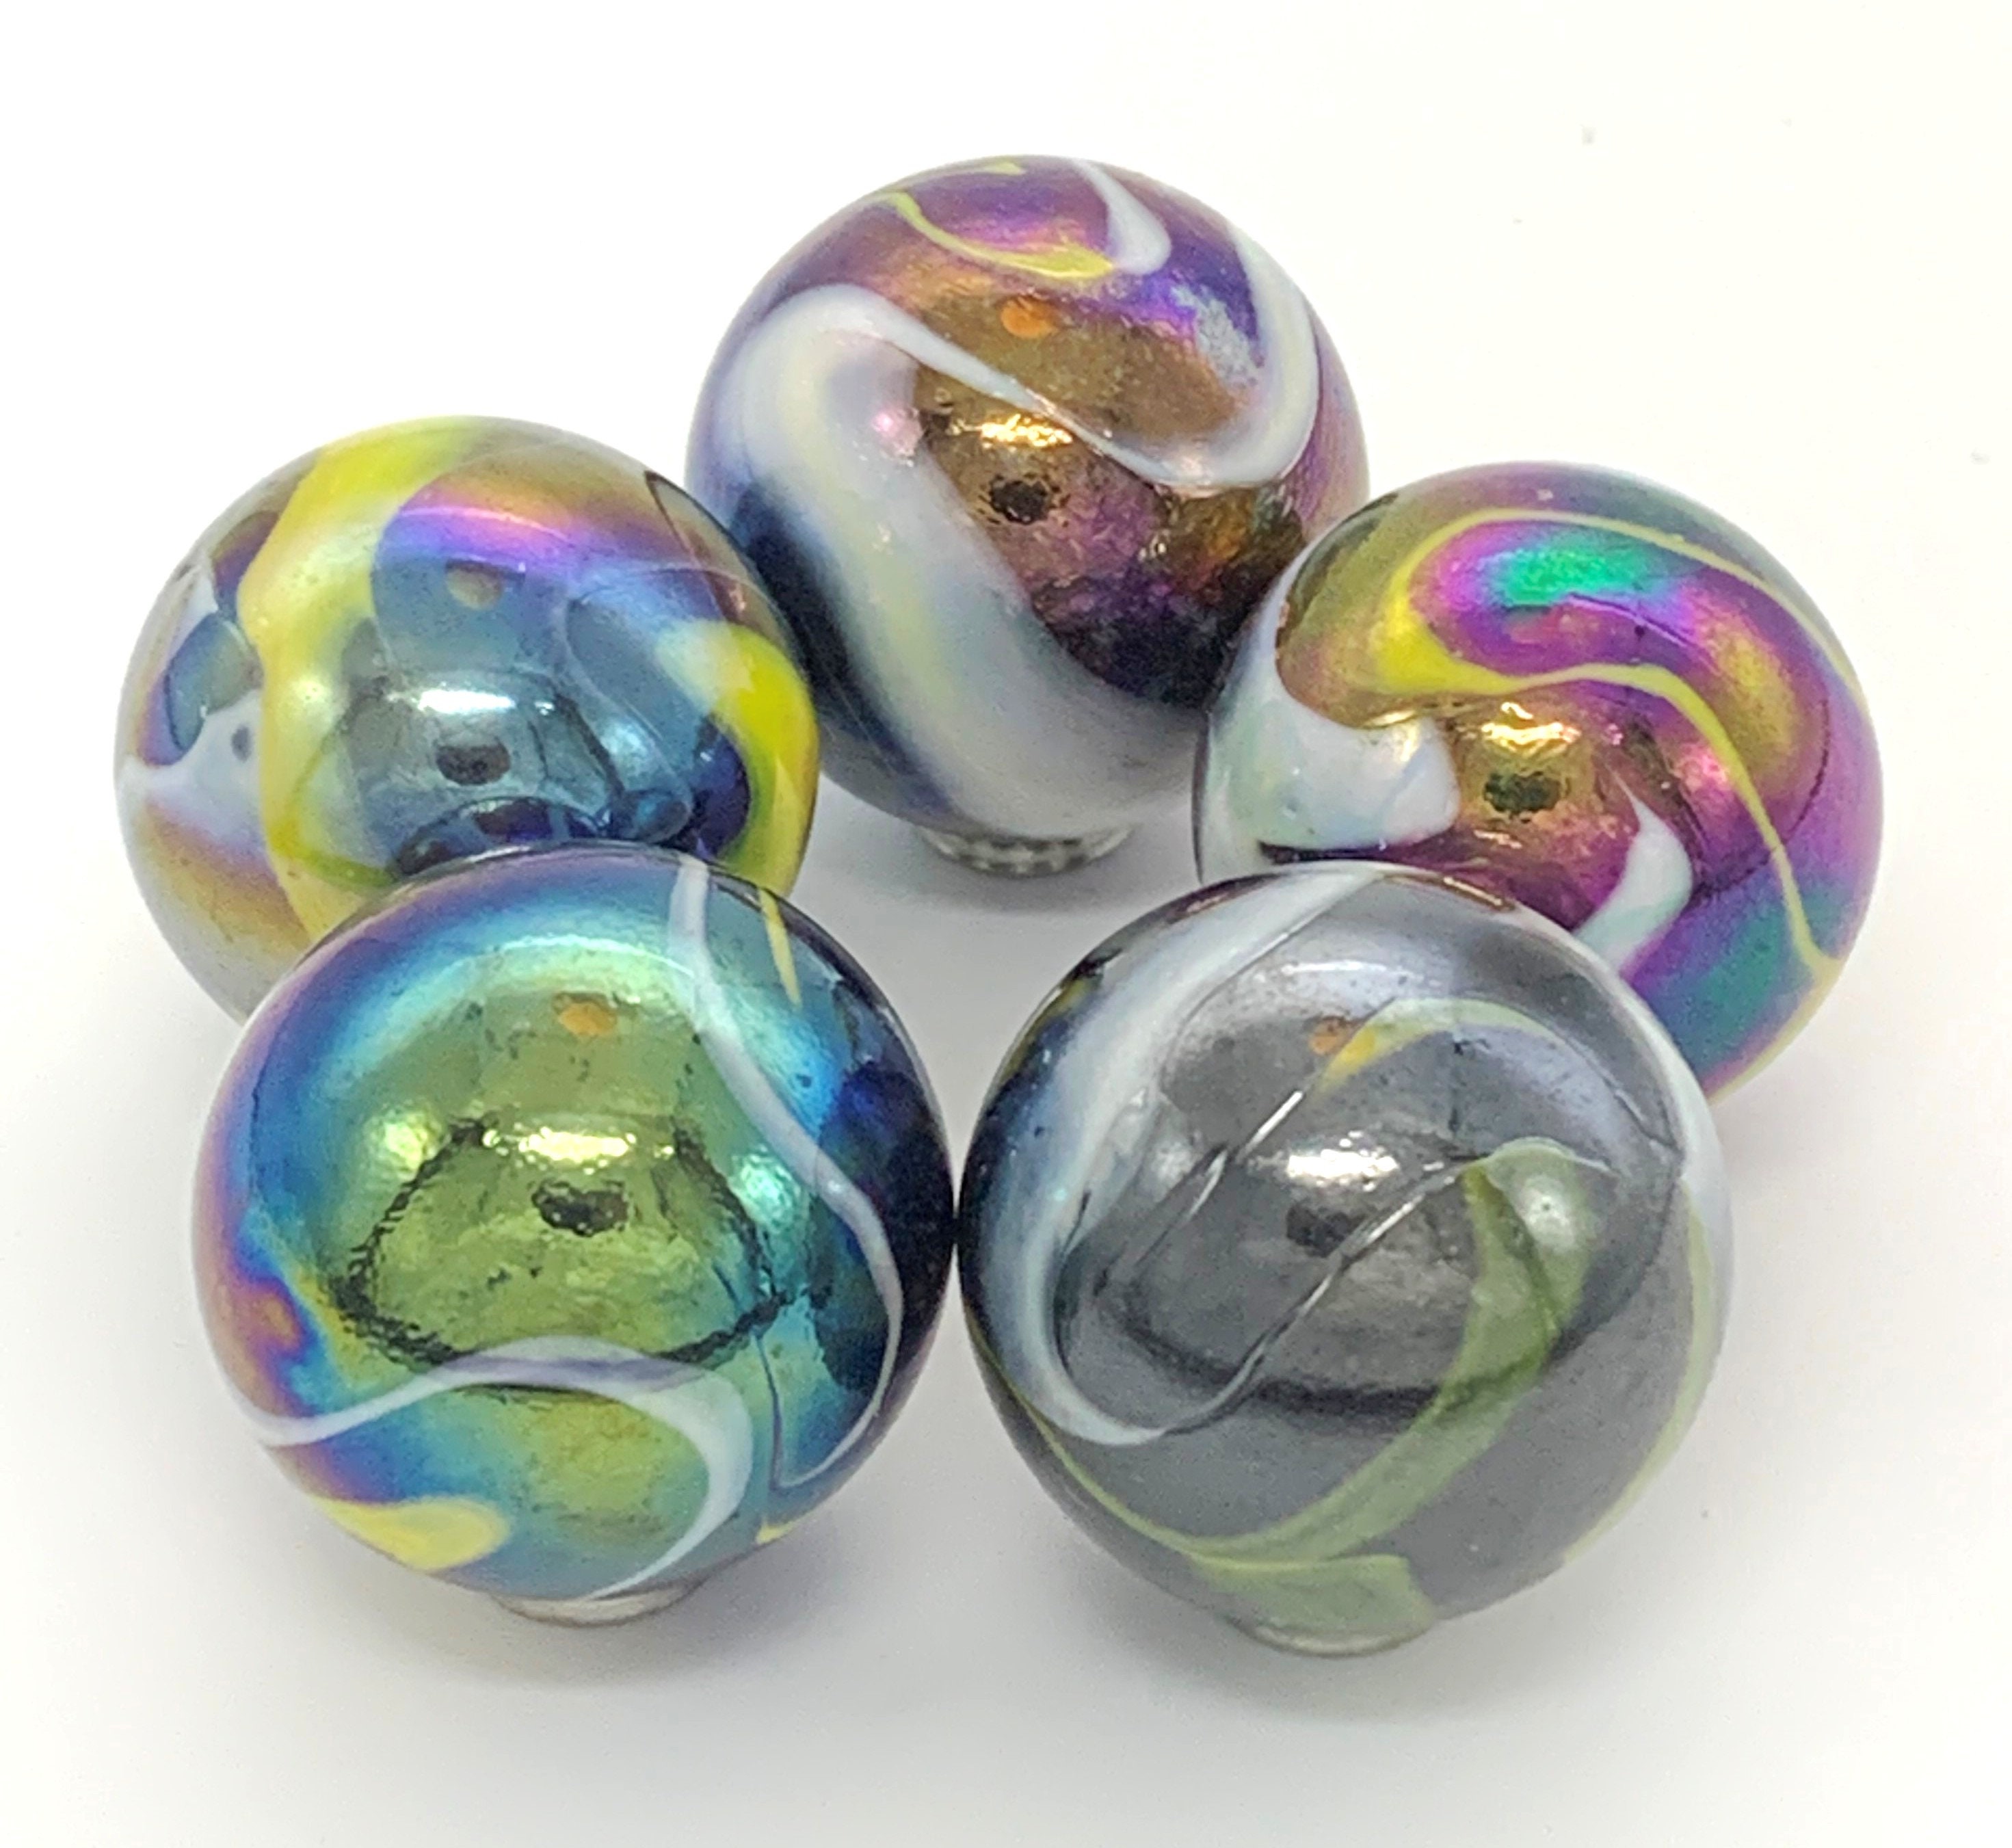 M228 25MM Transparent Clear Rolled In Colored Crushed Glass, Glass Marbles